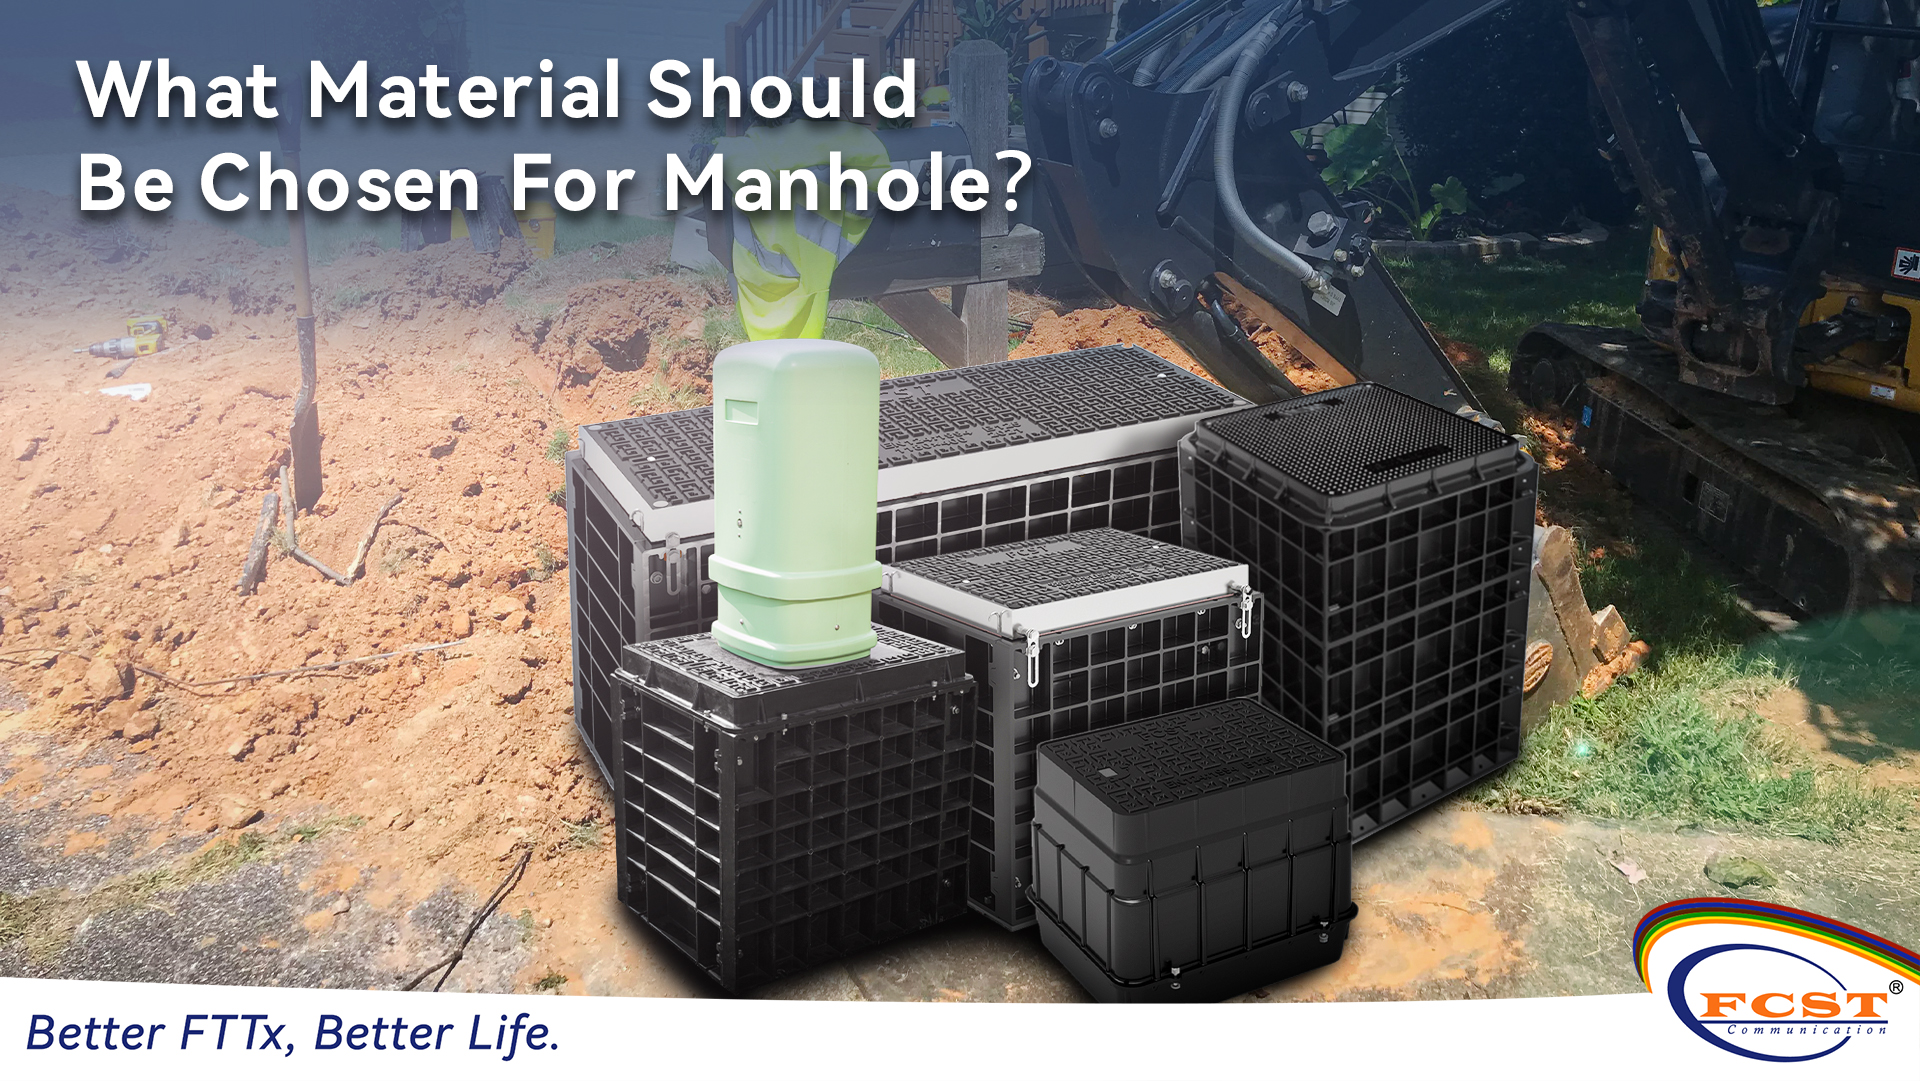 What Material Should Be Chosen For Manhole?